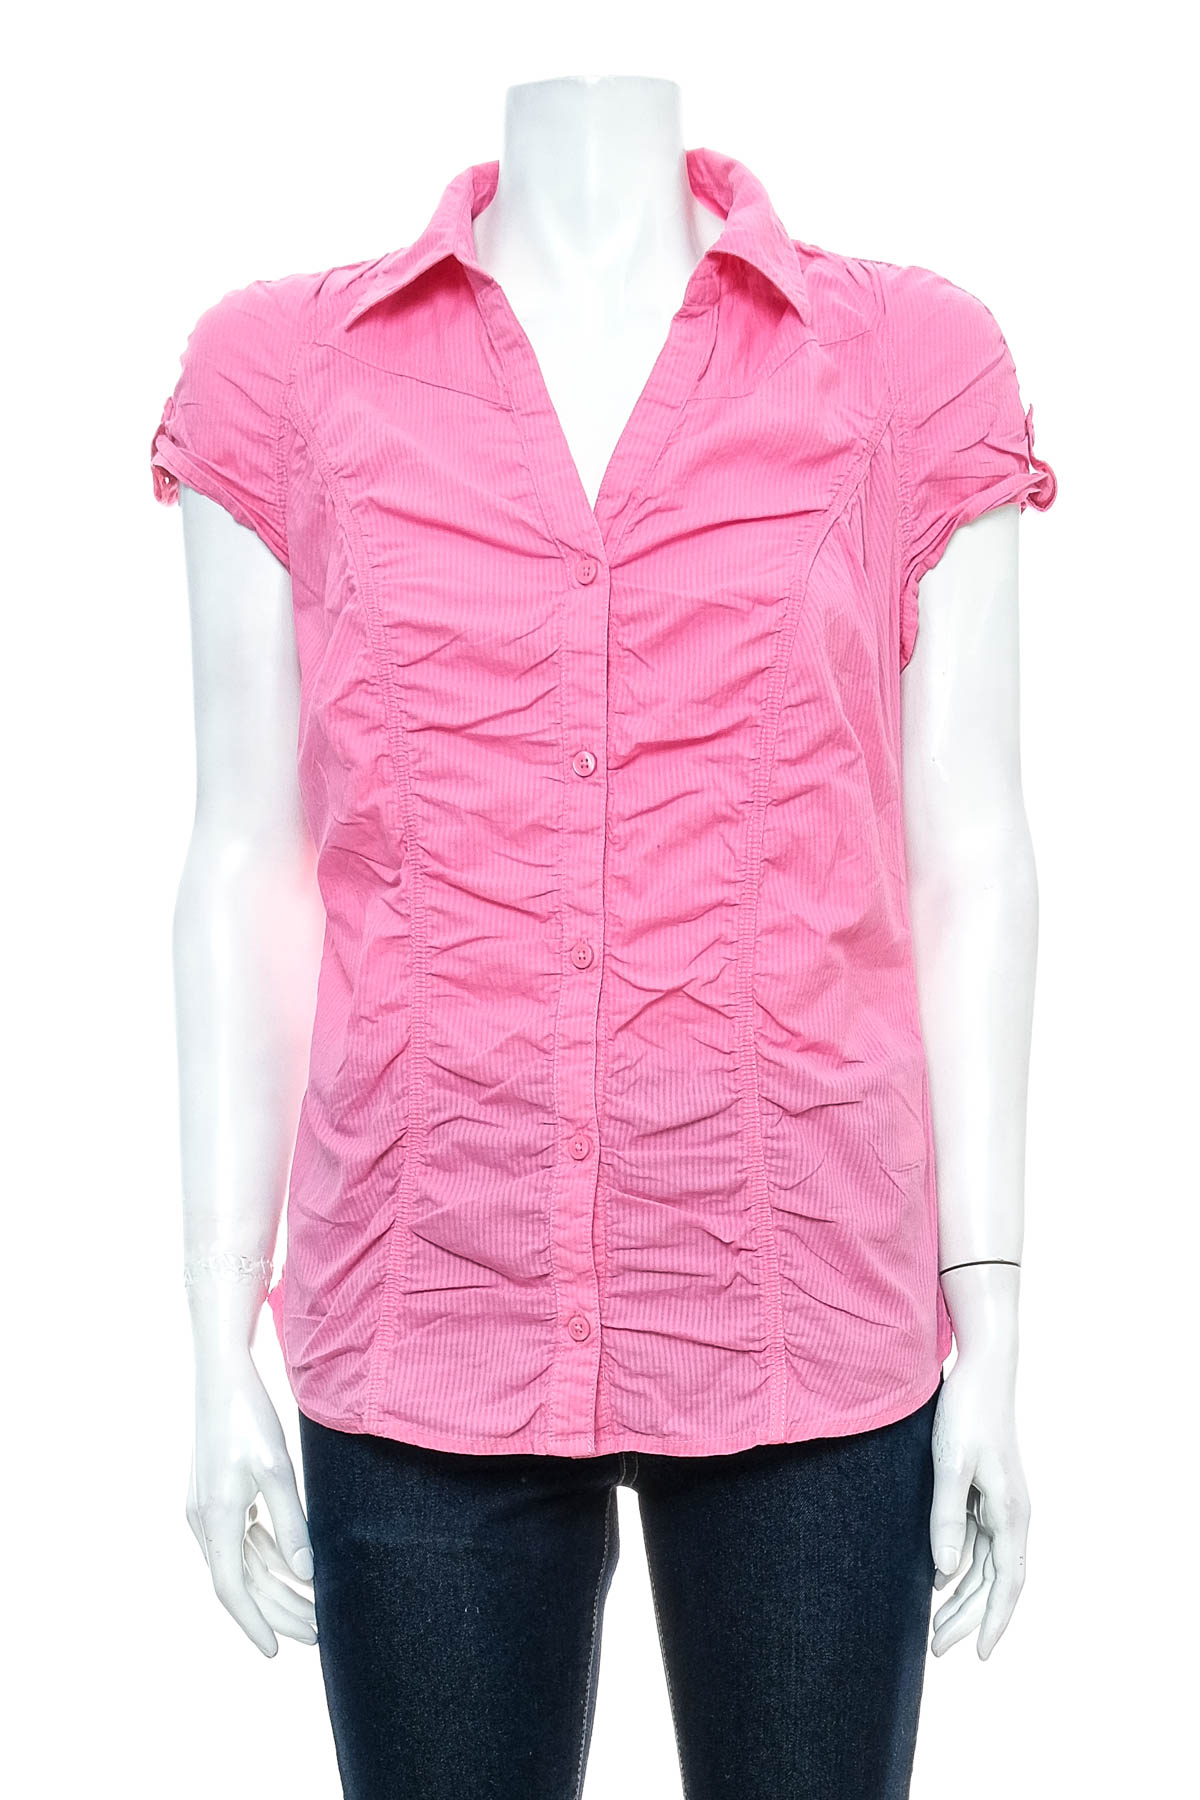 Women's shirt - COLOURS OF THE WORLD - 0